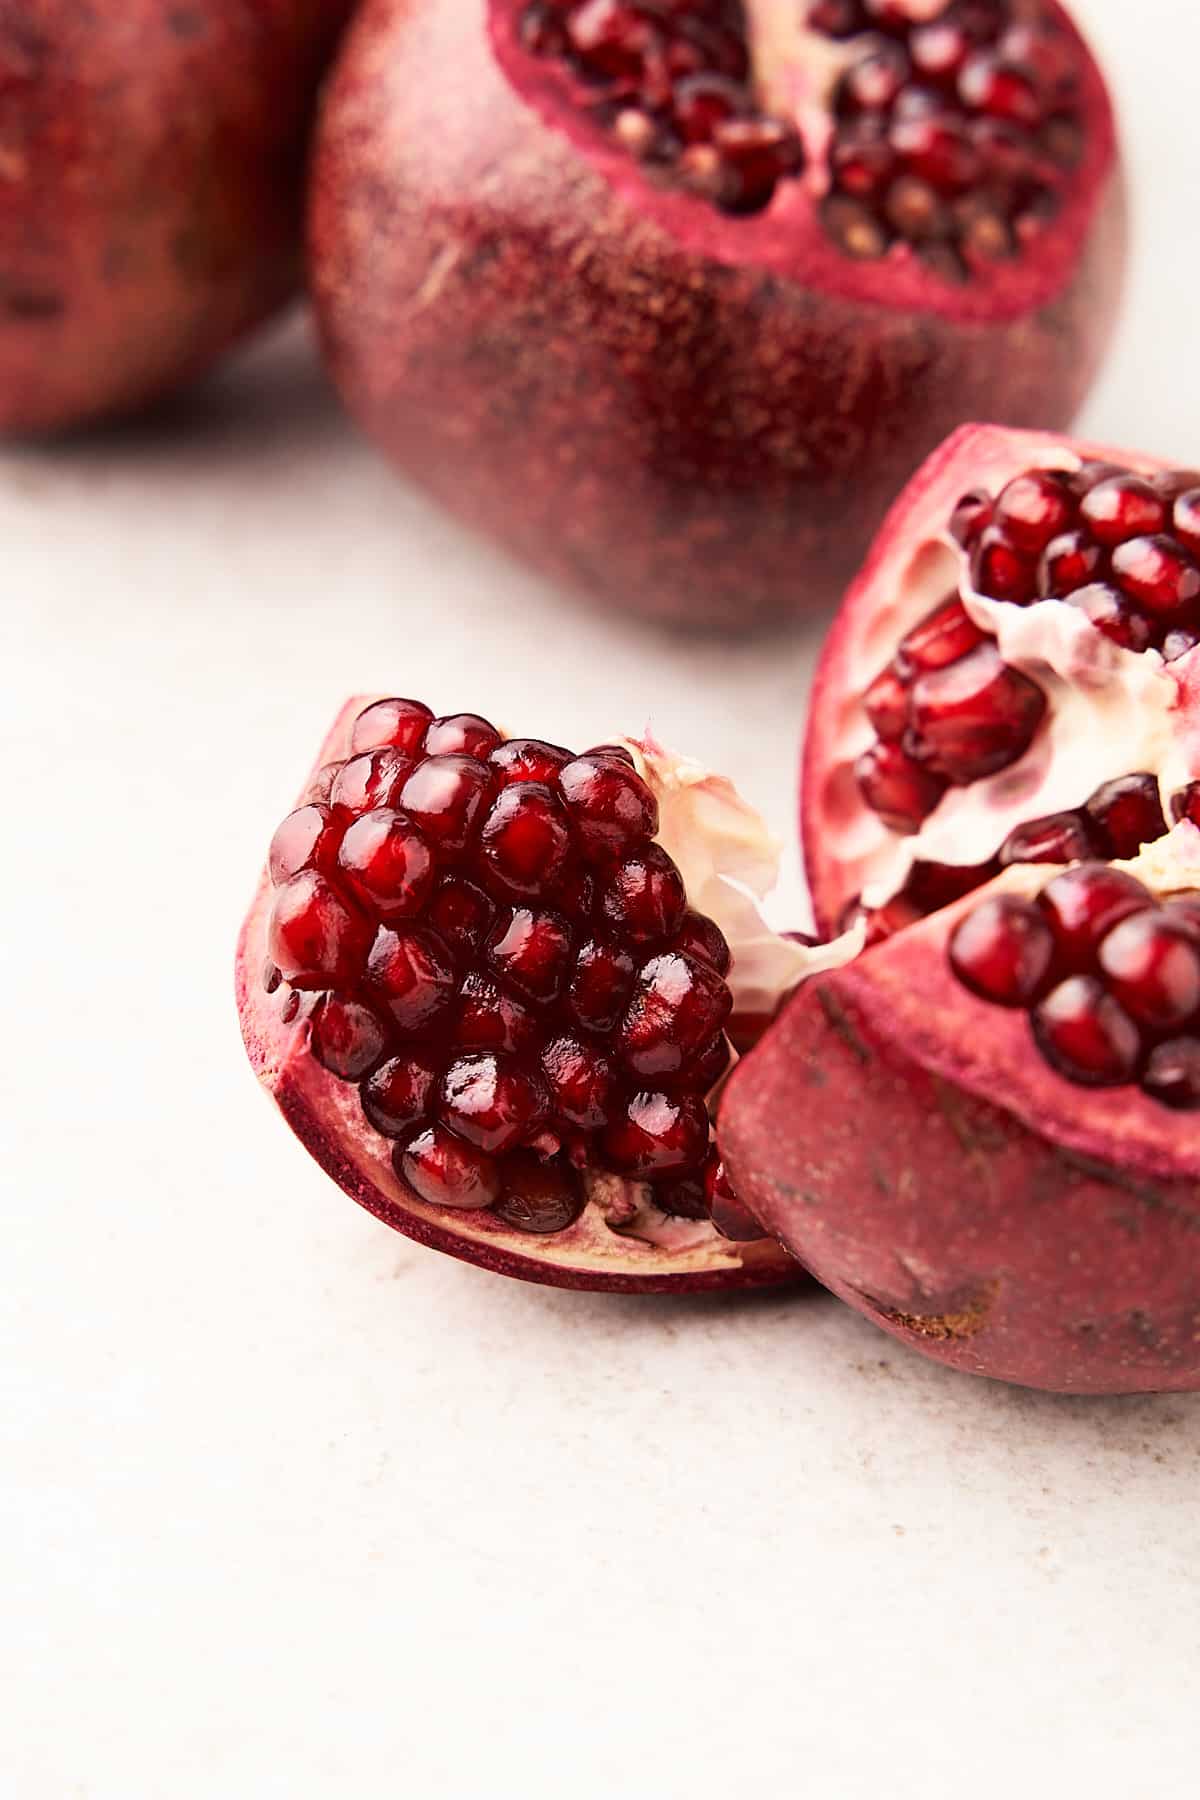 Single pomegranate section with seeds.